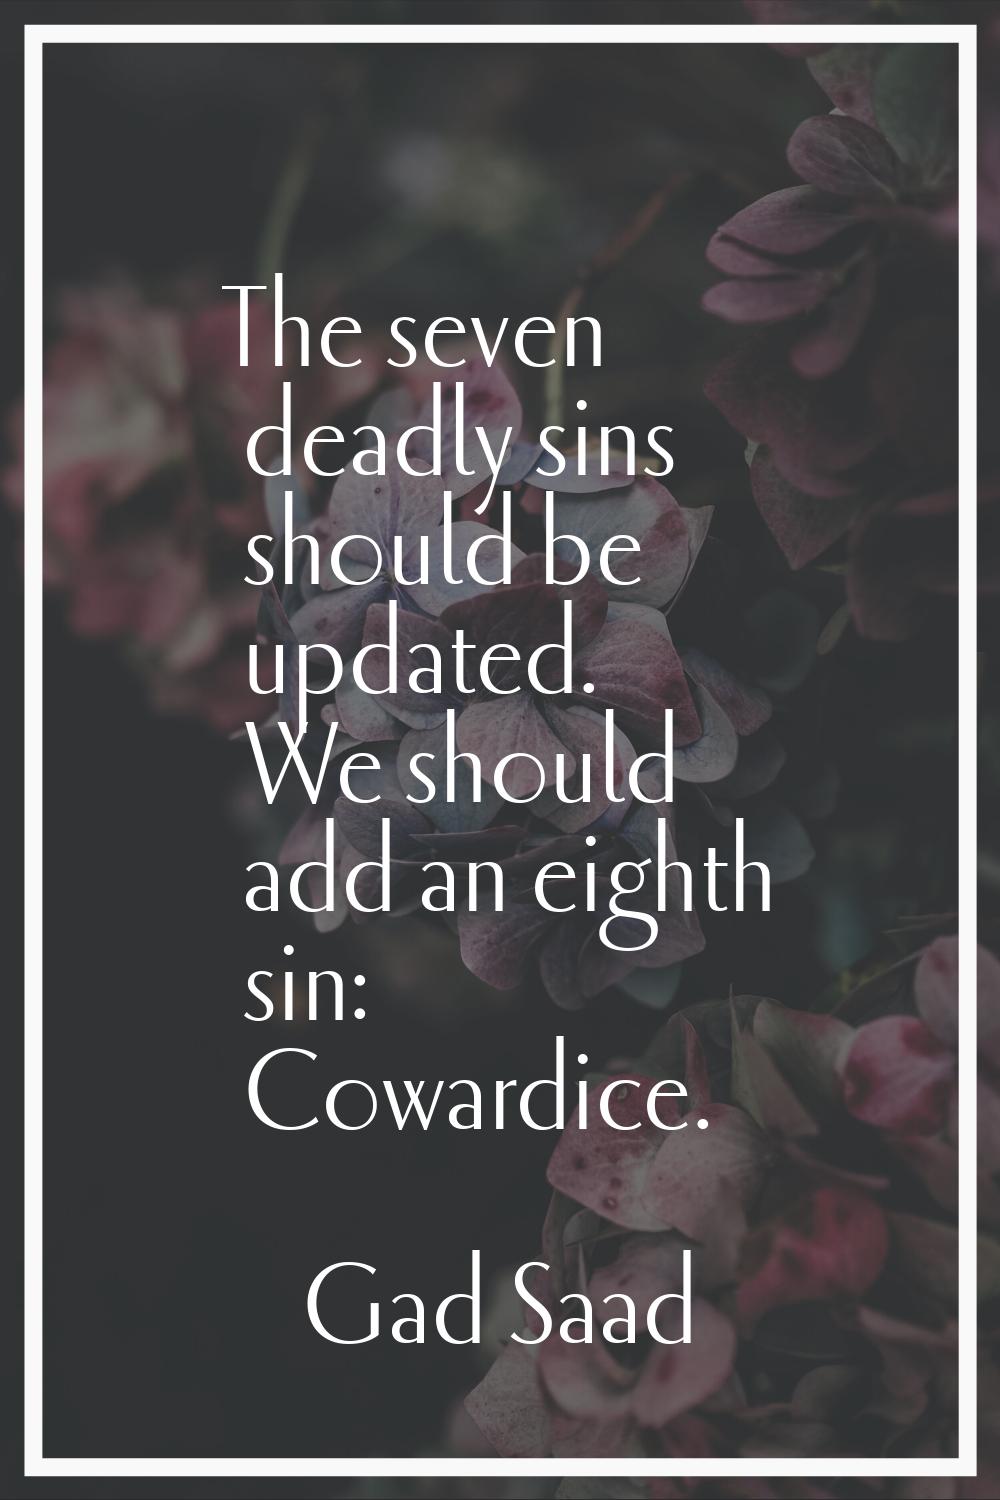 The seven deadly sins should be updated. We should add an eighth sin: Cowardice.